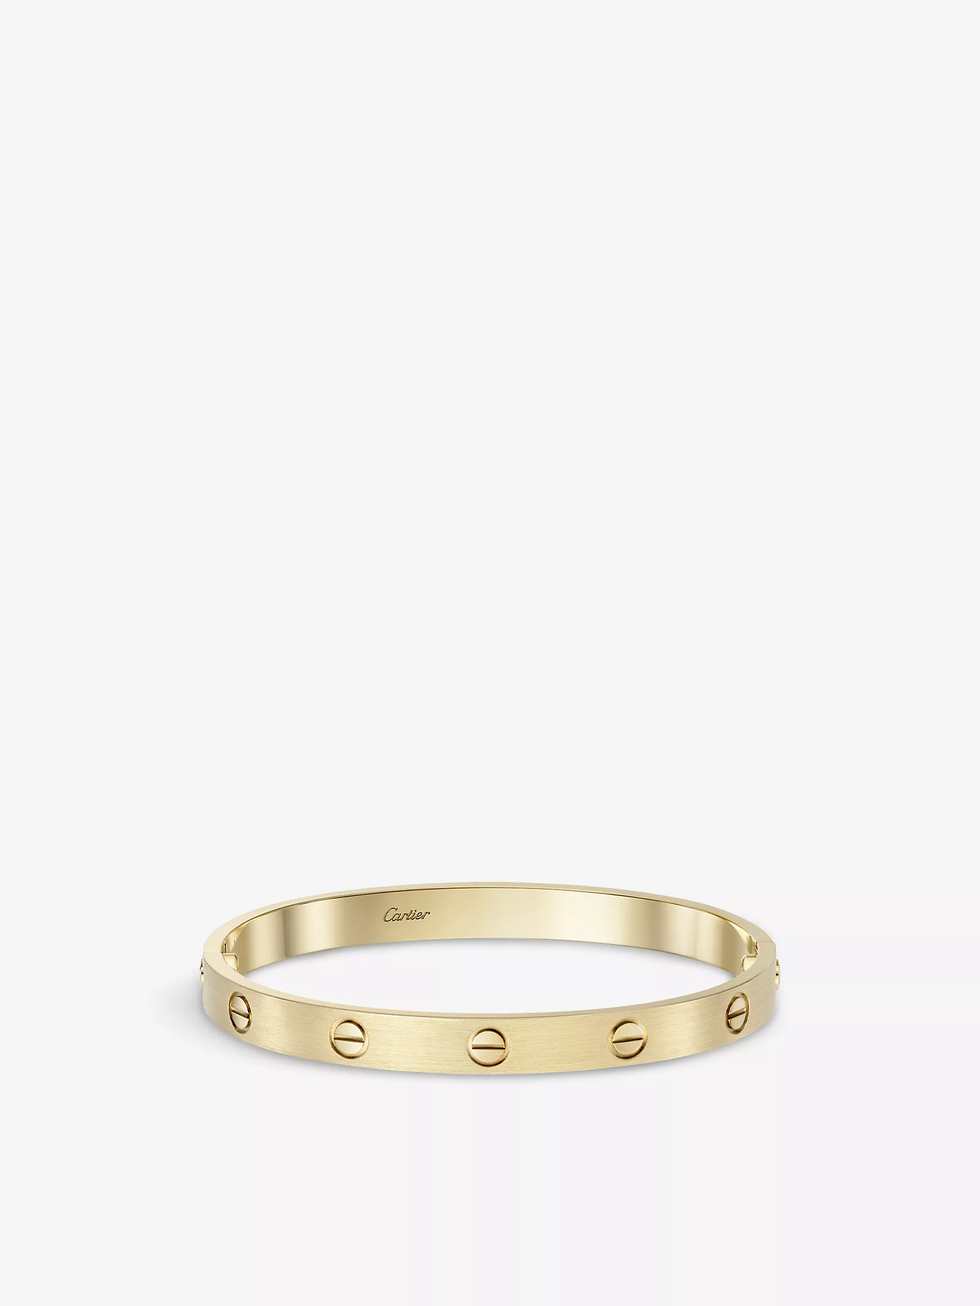 LOVE brushed 18ct yellow-gold bracelet